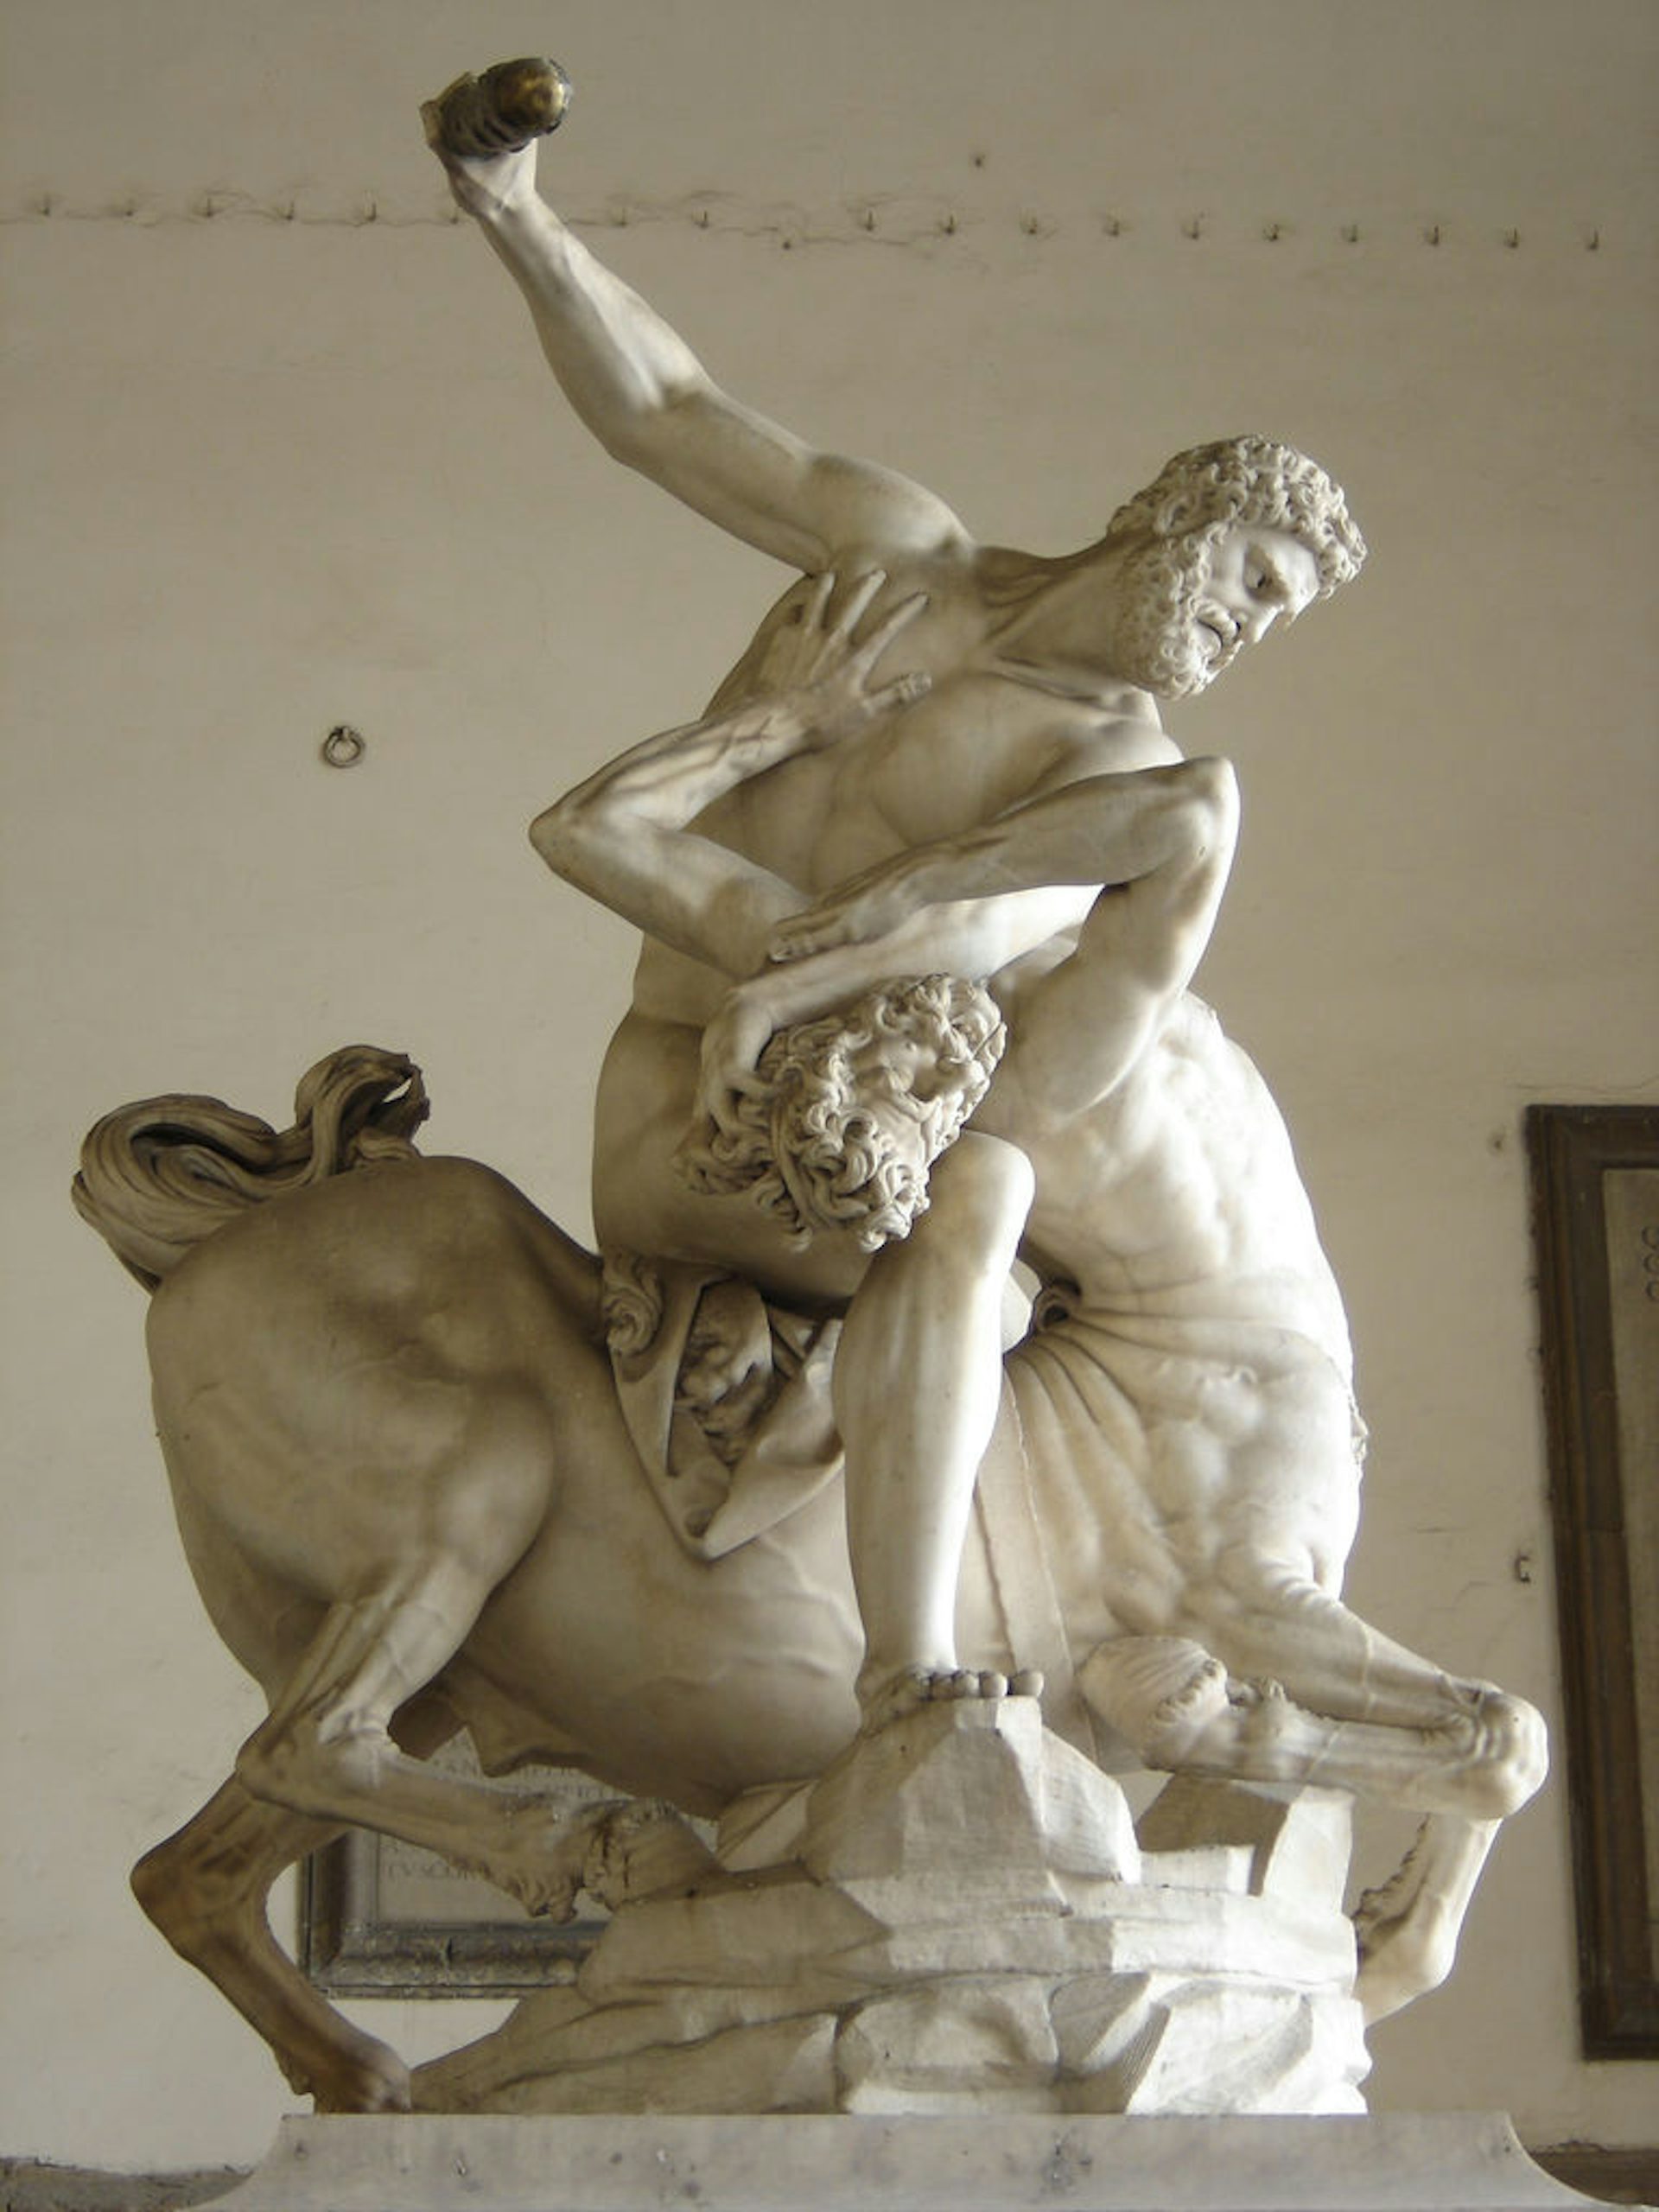 Hercules and the Centaur by Giambologna, 1599